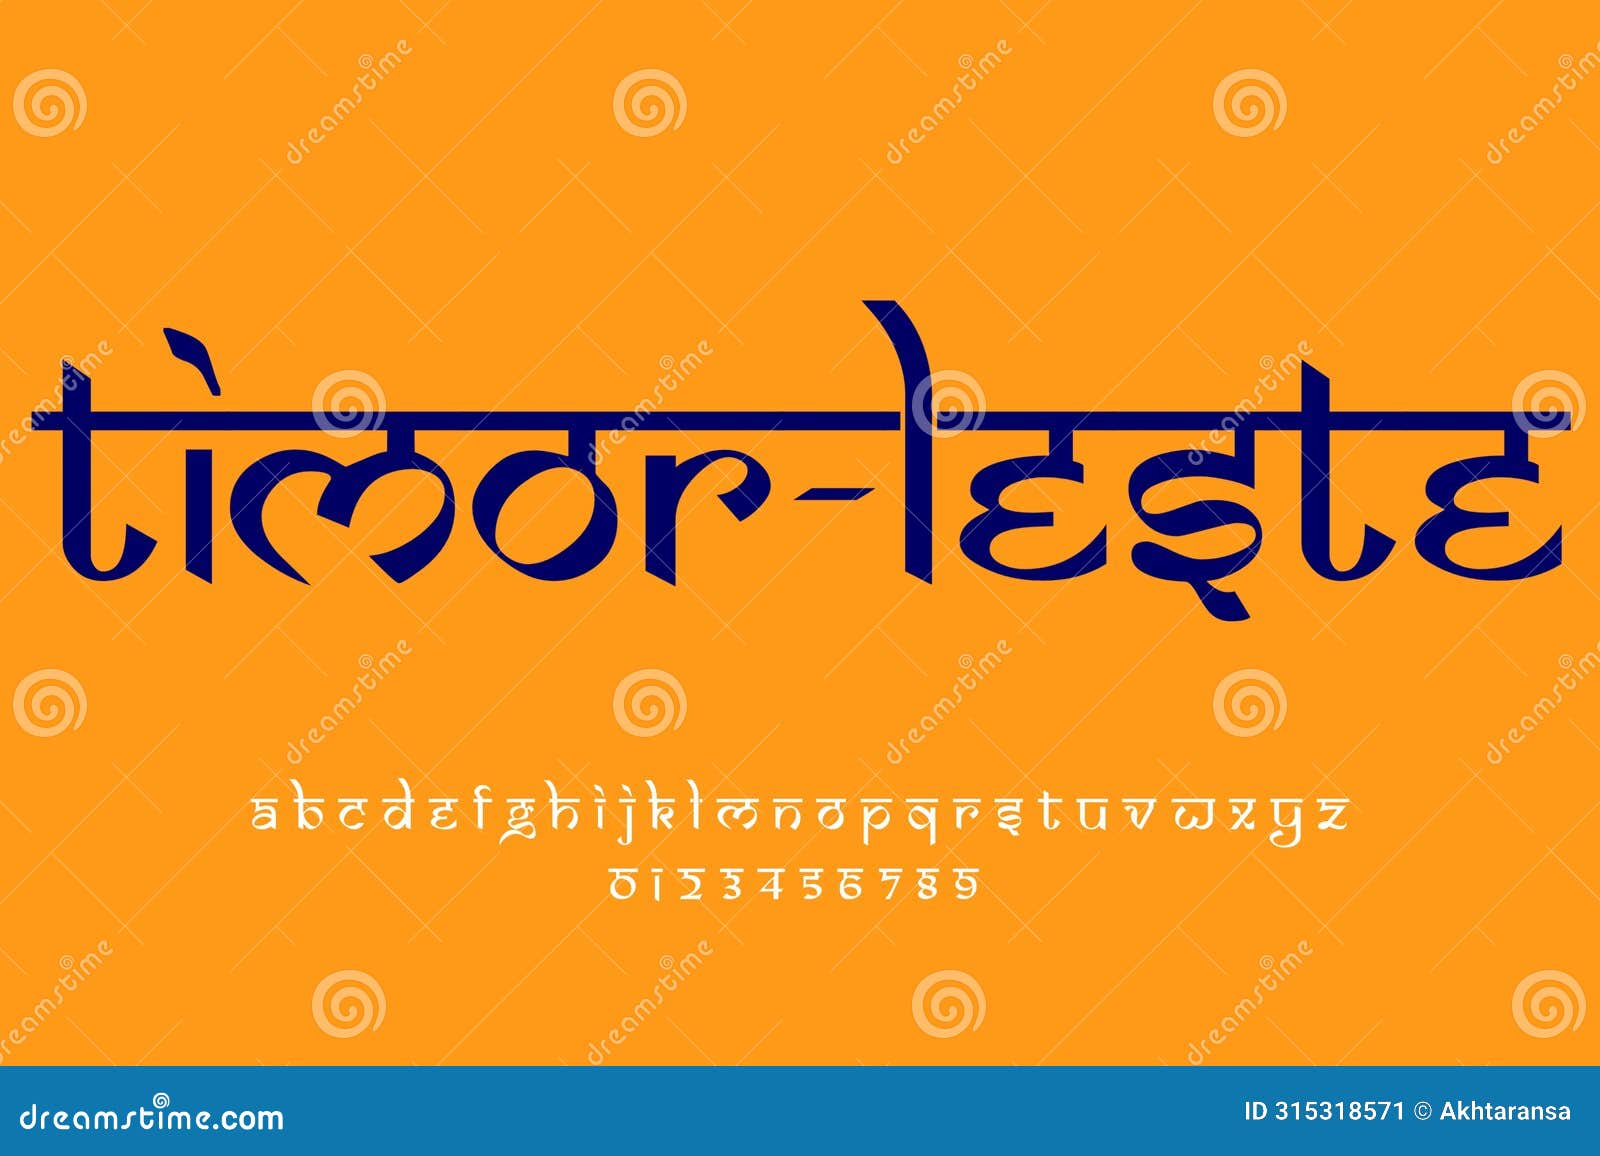 country timor leste name text . indian style latin font , devanagari inspired alphabet, letters and numbers,